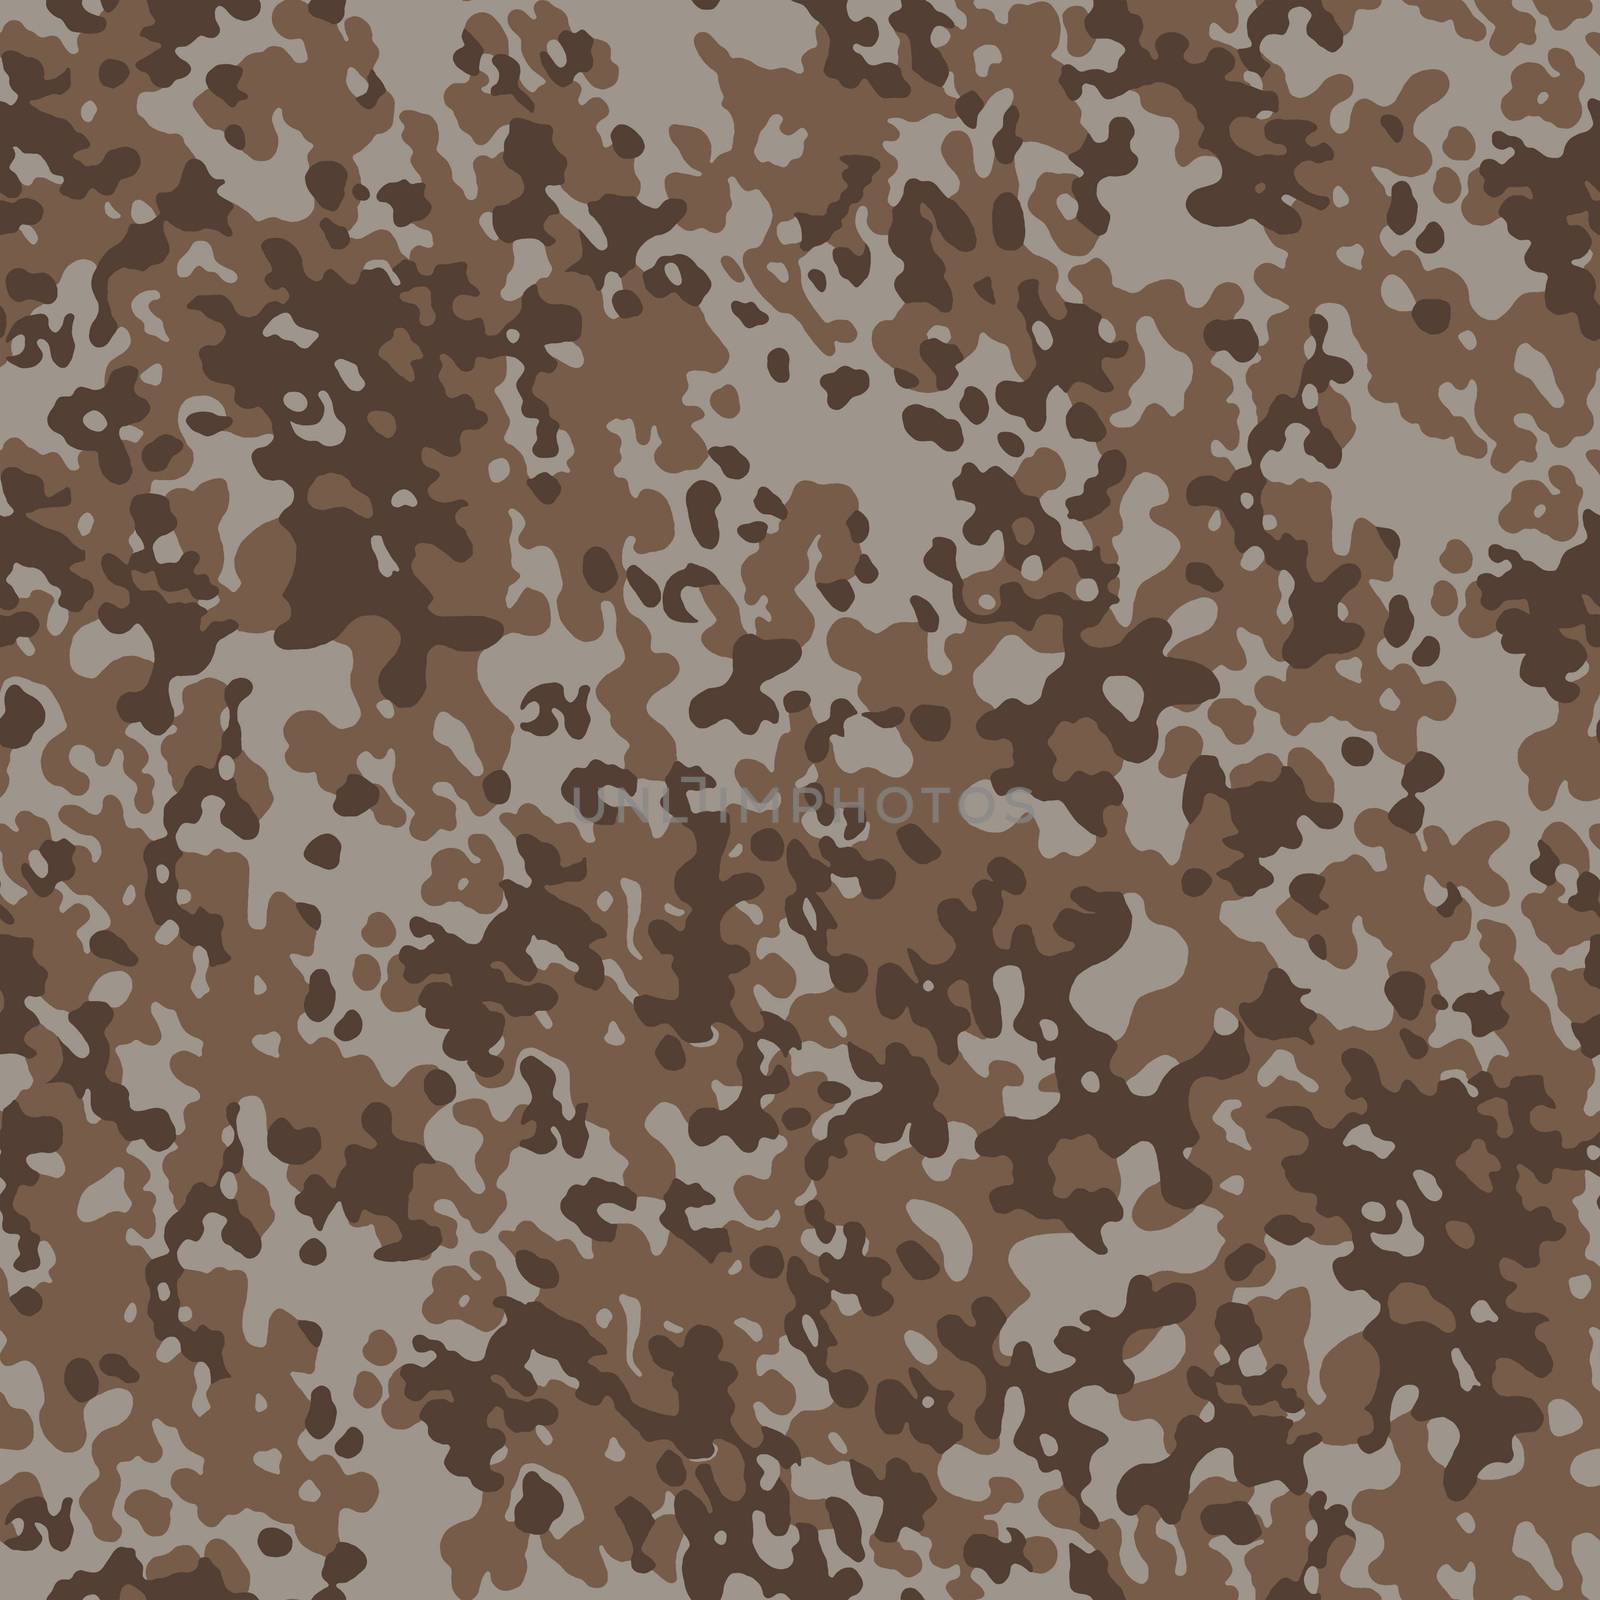 Military camouflage of the us army.Texture or background by Mastak80